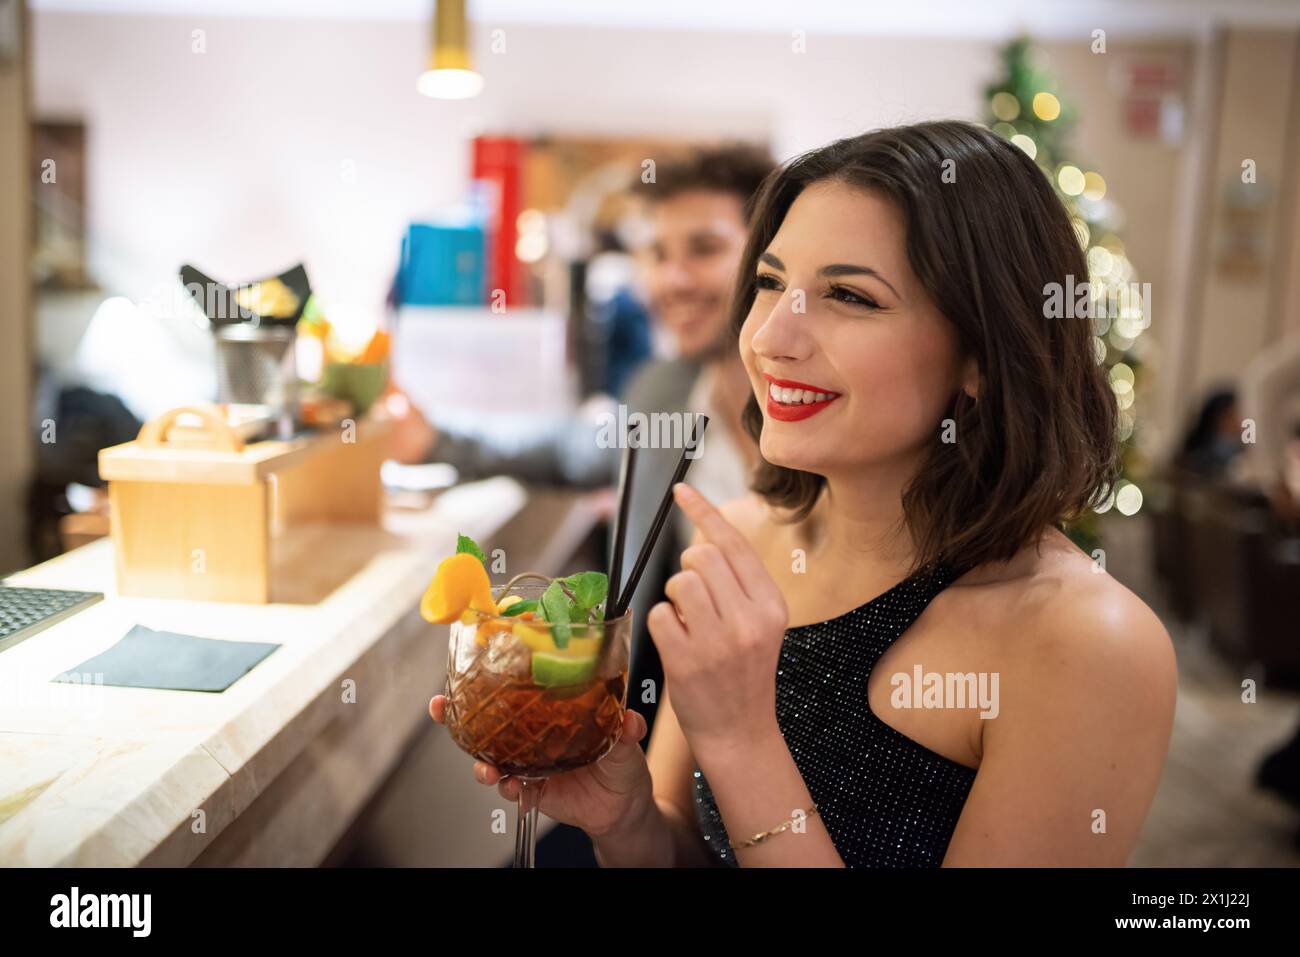 Young woman drinking a cocktail at a bar counter Stock Photo